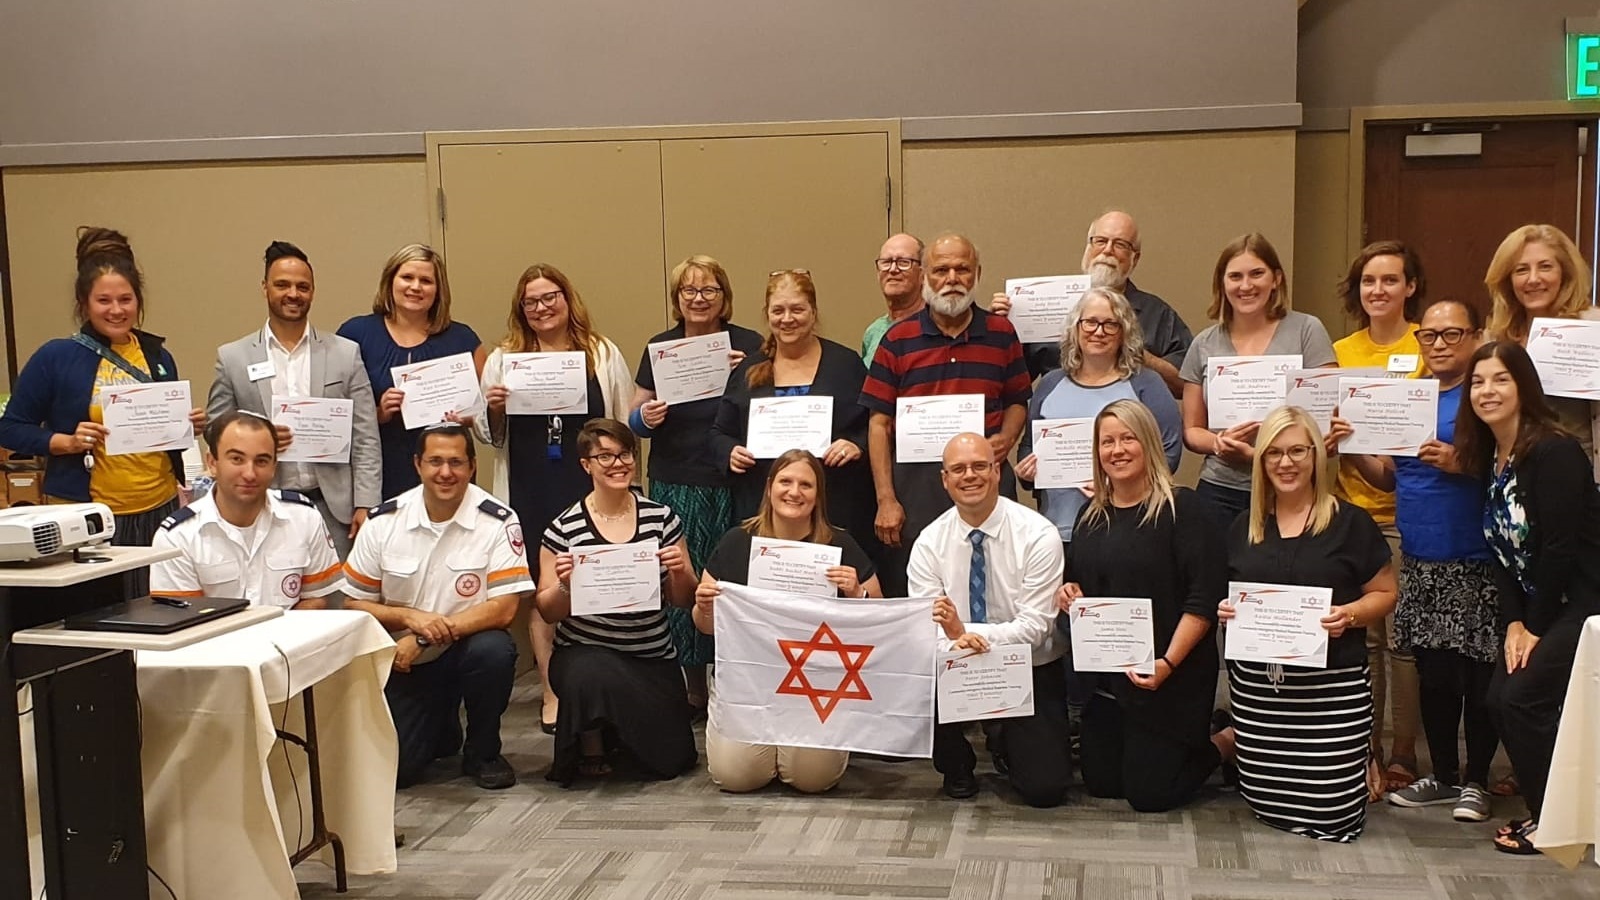 Graduates of the 'First 7 Minutes' course given by Magen David Adom paramedics in Milwaukee. Photo courtesy of MDA